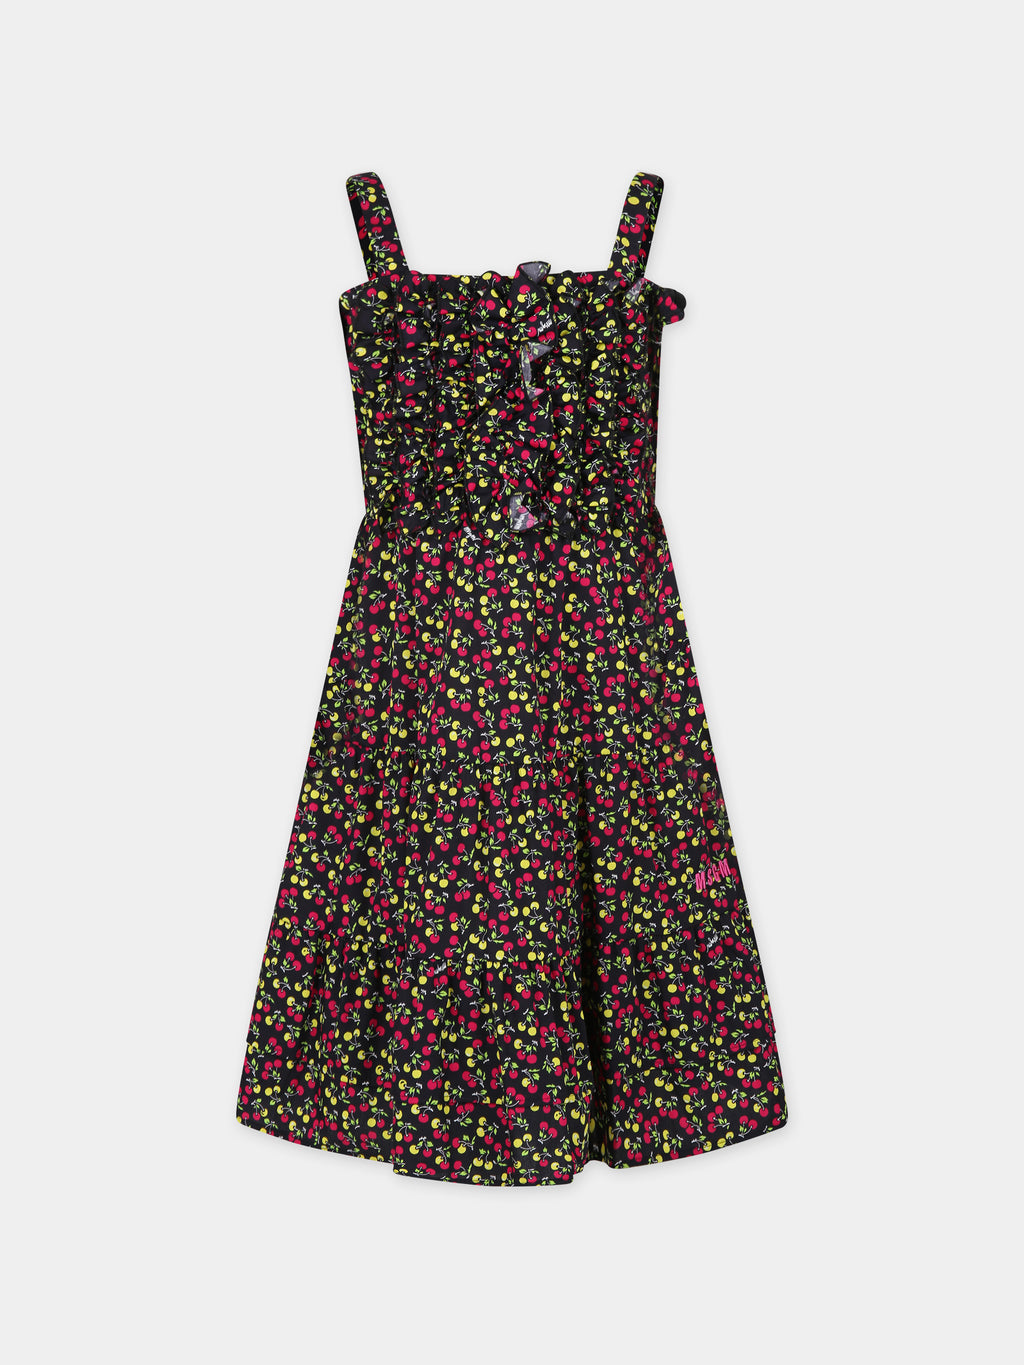 Black dress for girl with cherry print